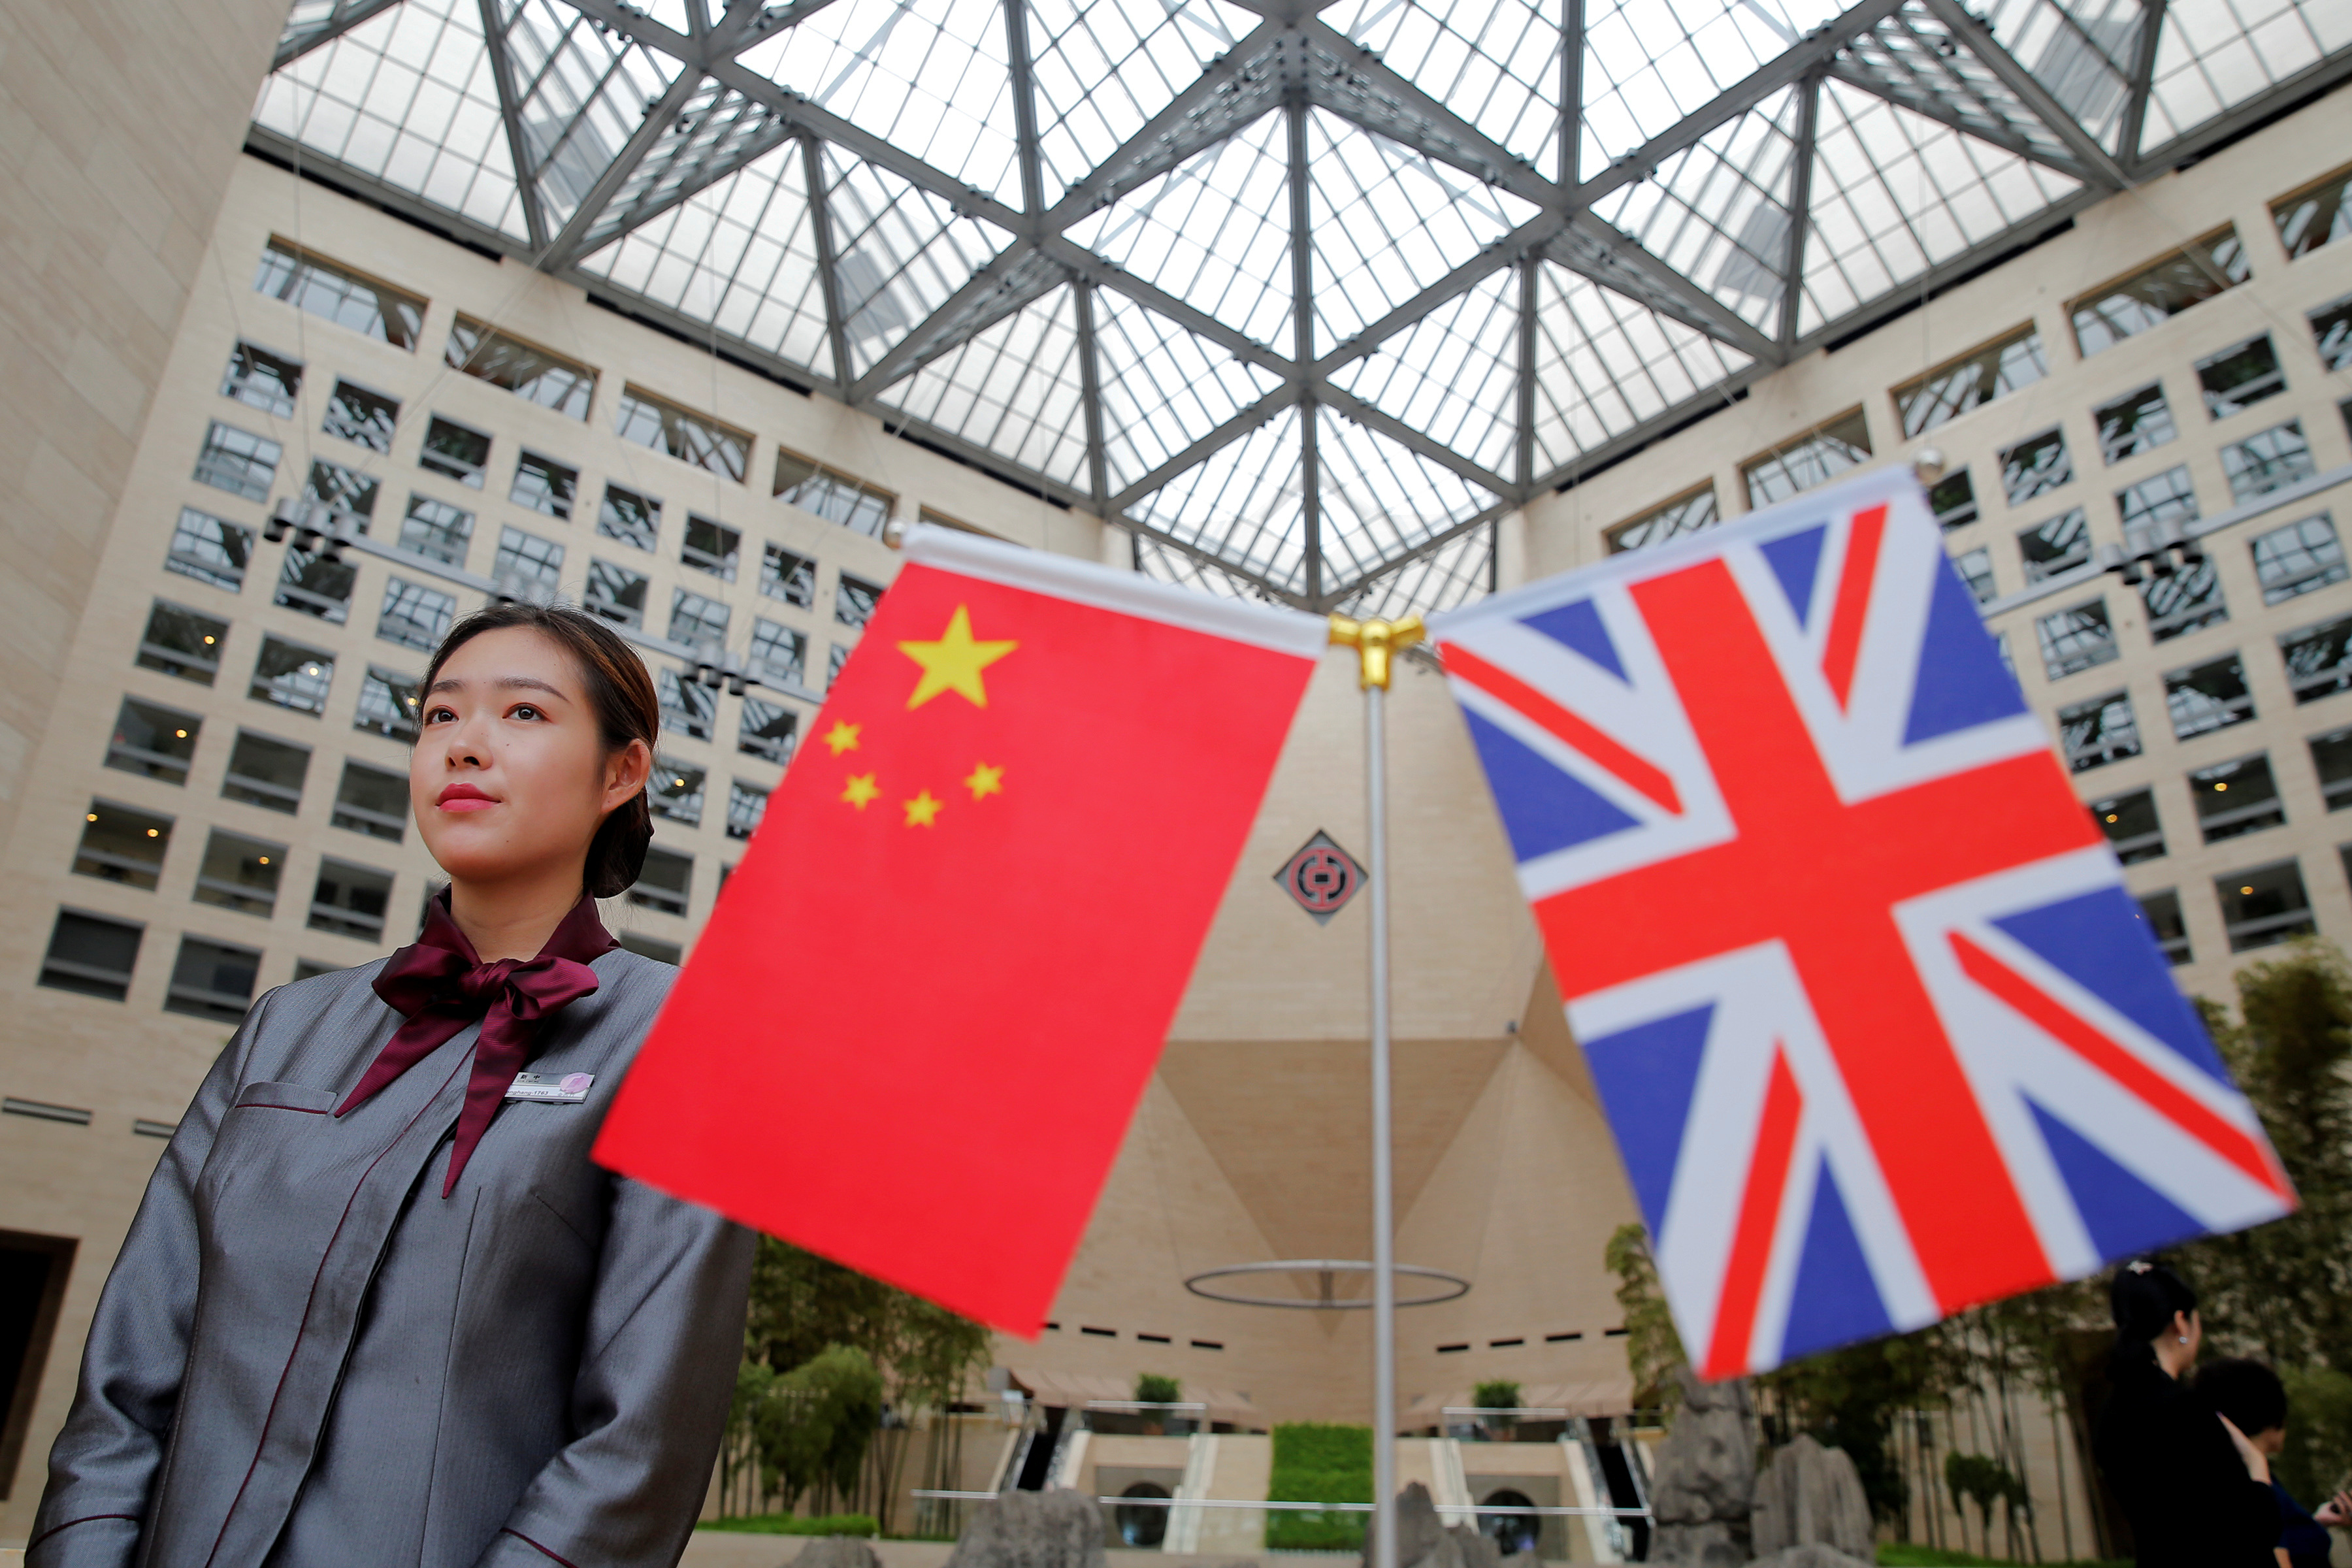 A member of staff waits behind flags at the Bank of China head office building in Beijing